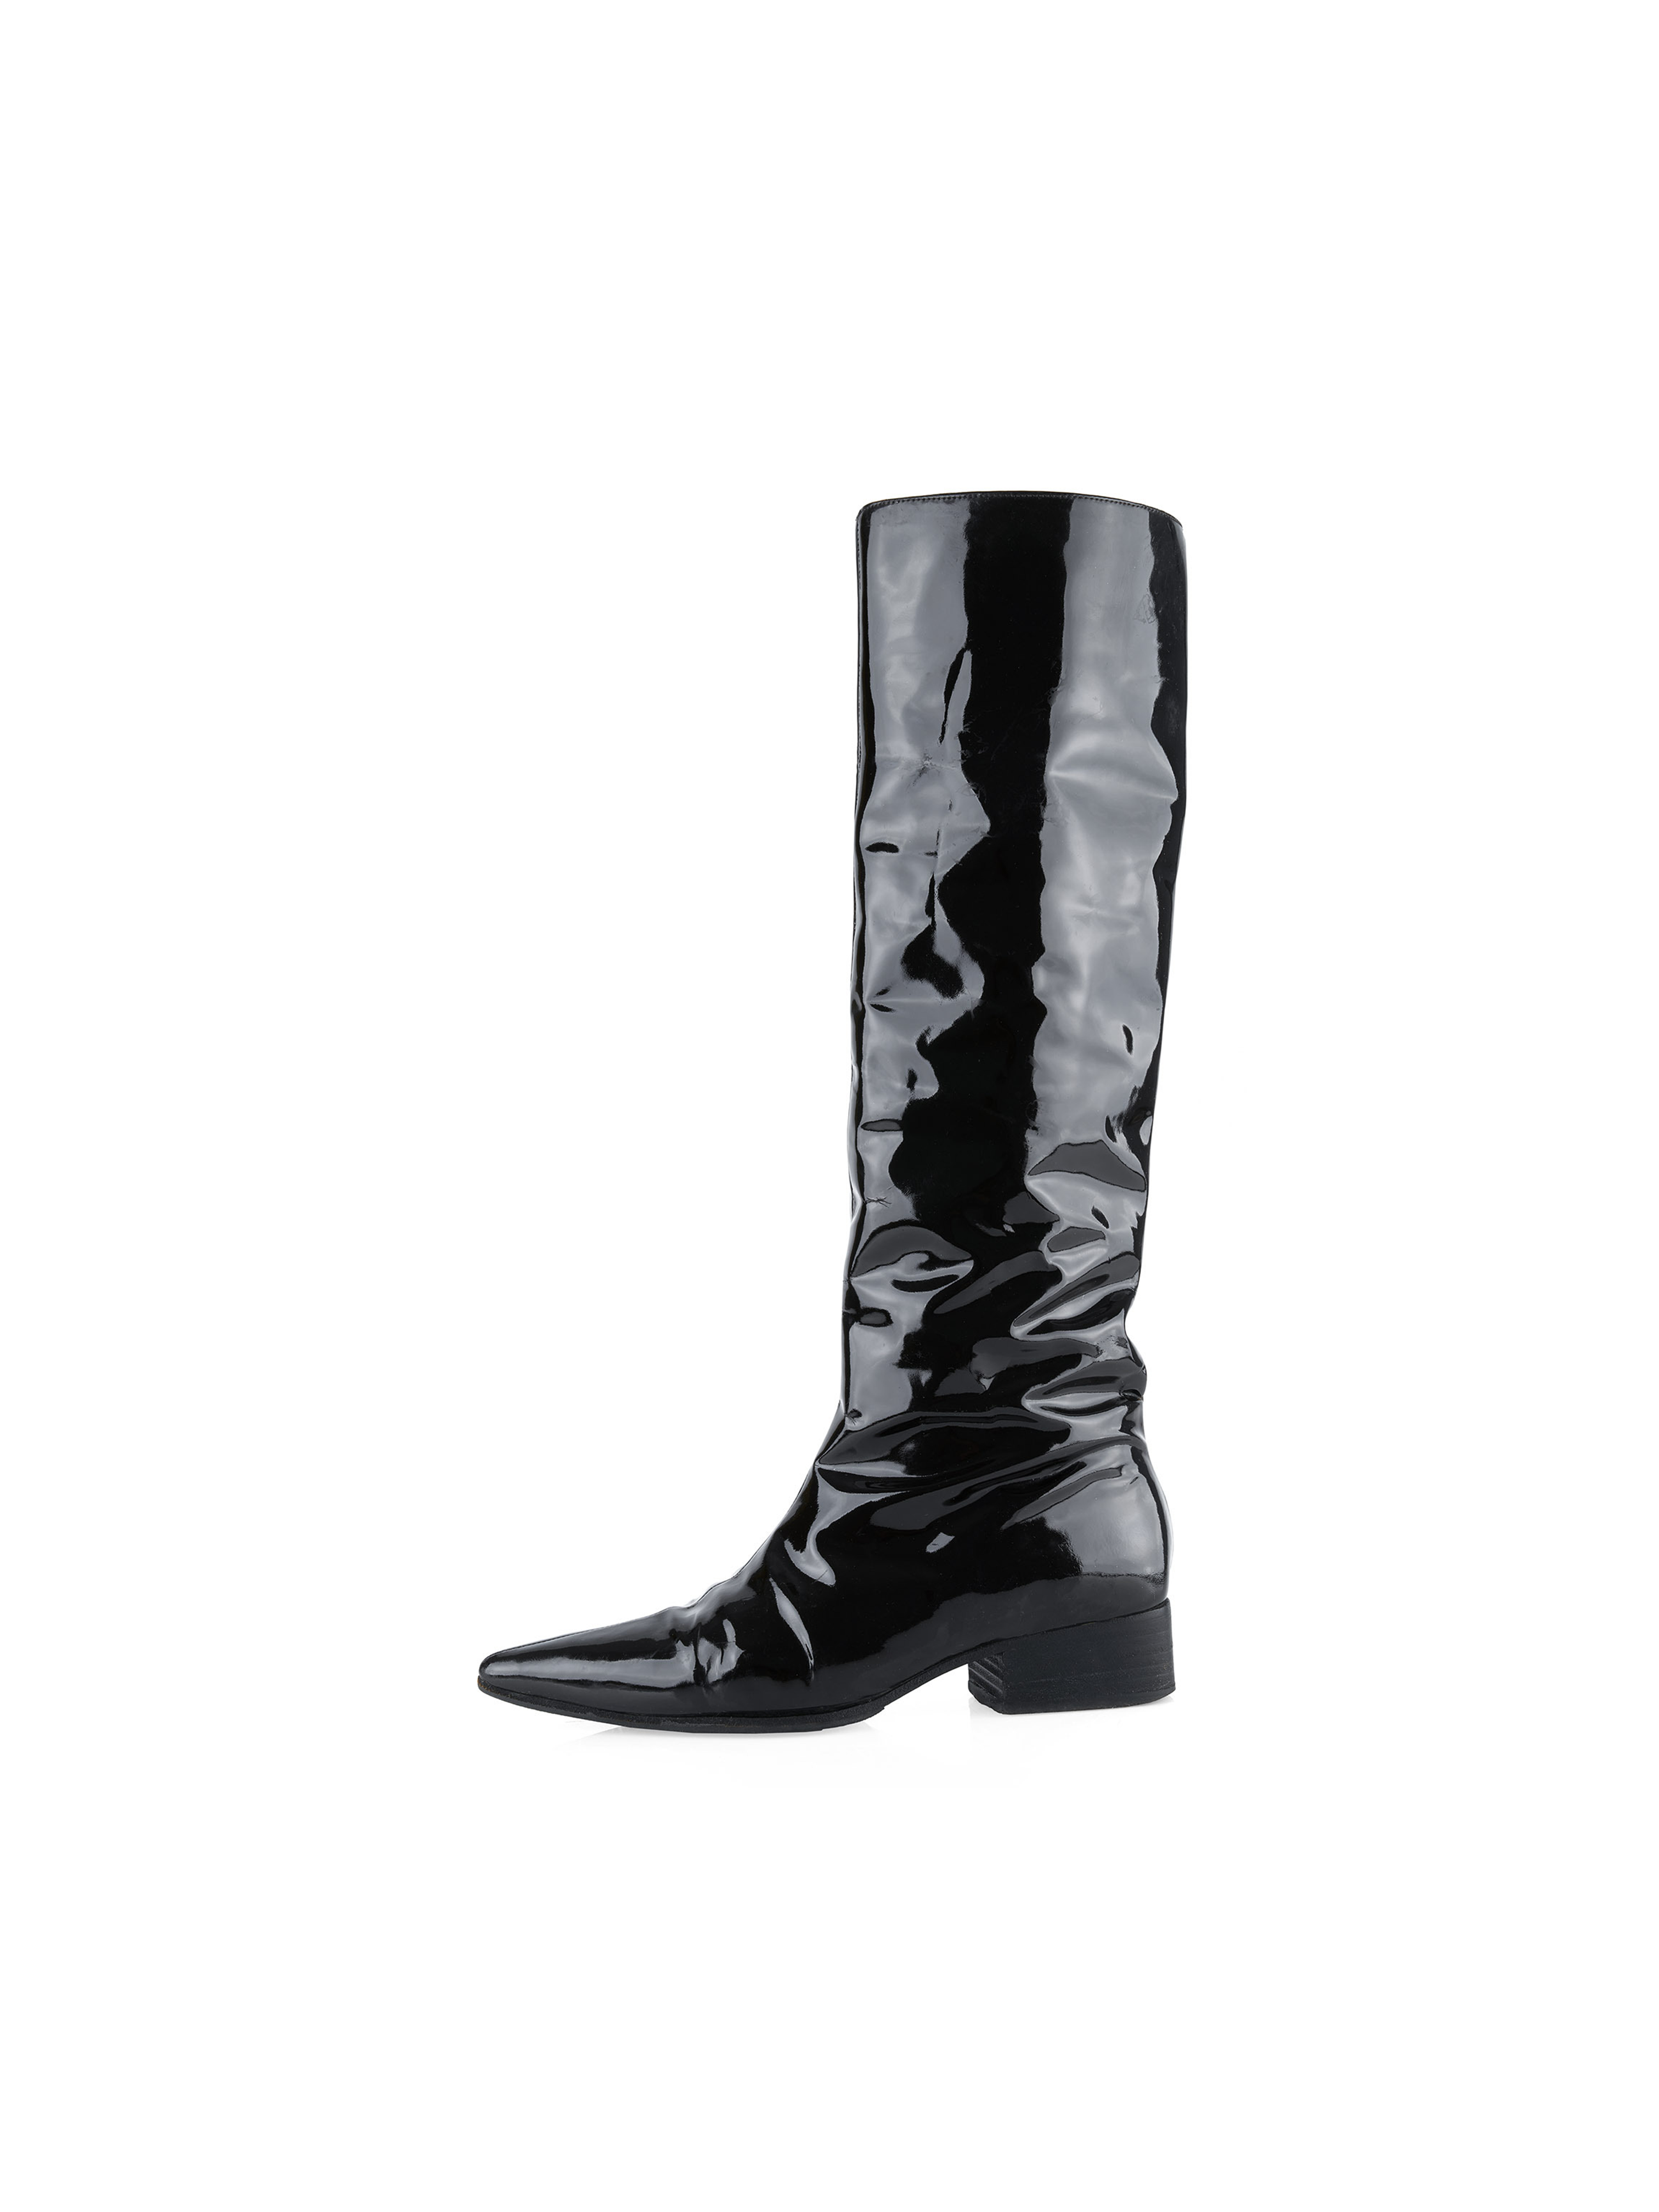 Gucci by Tom Ford Fall 1997 Black Patent Leather Knee-high Boots